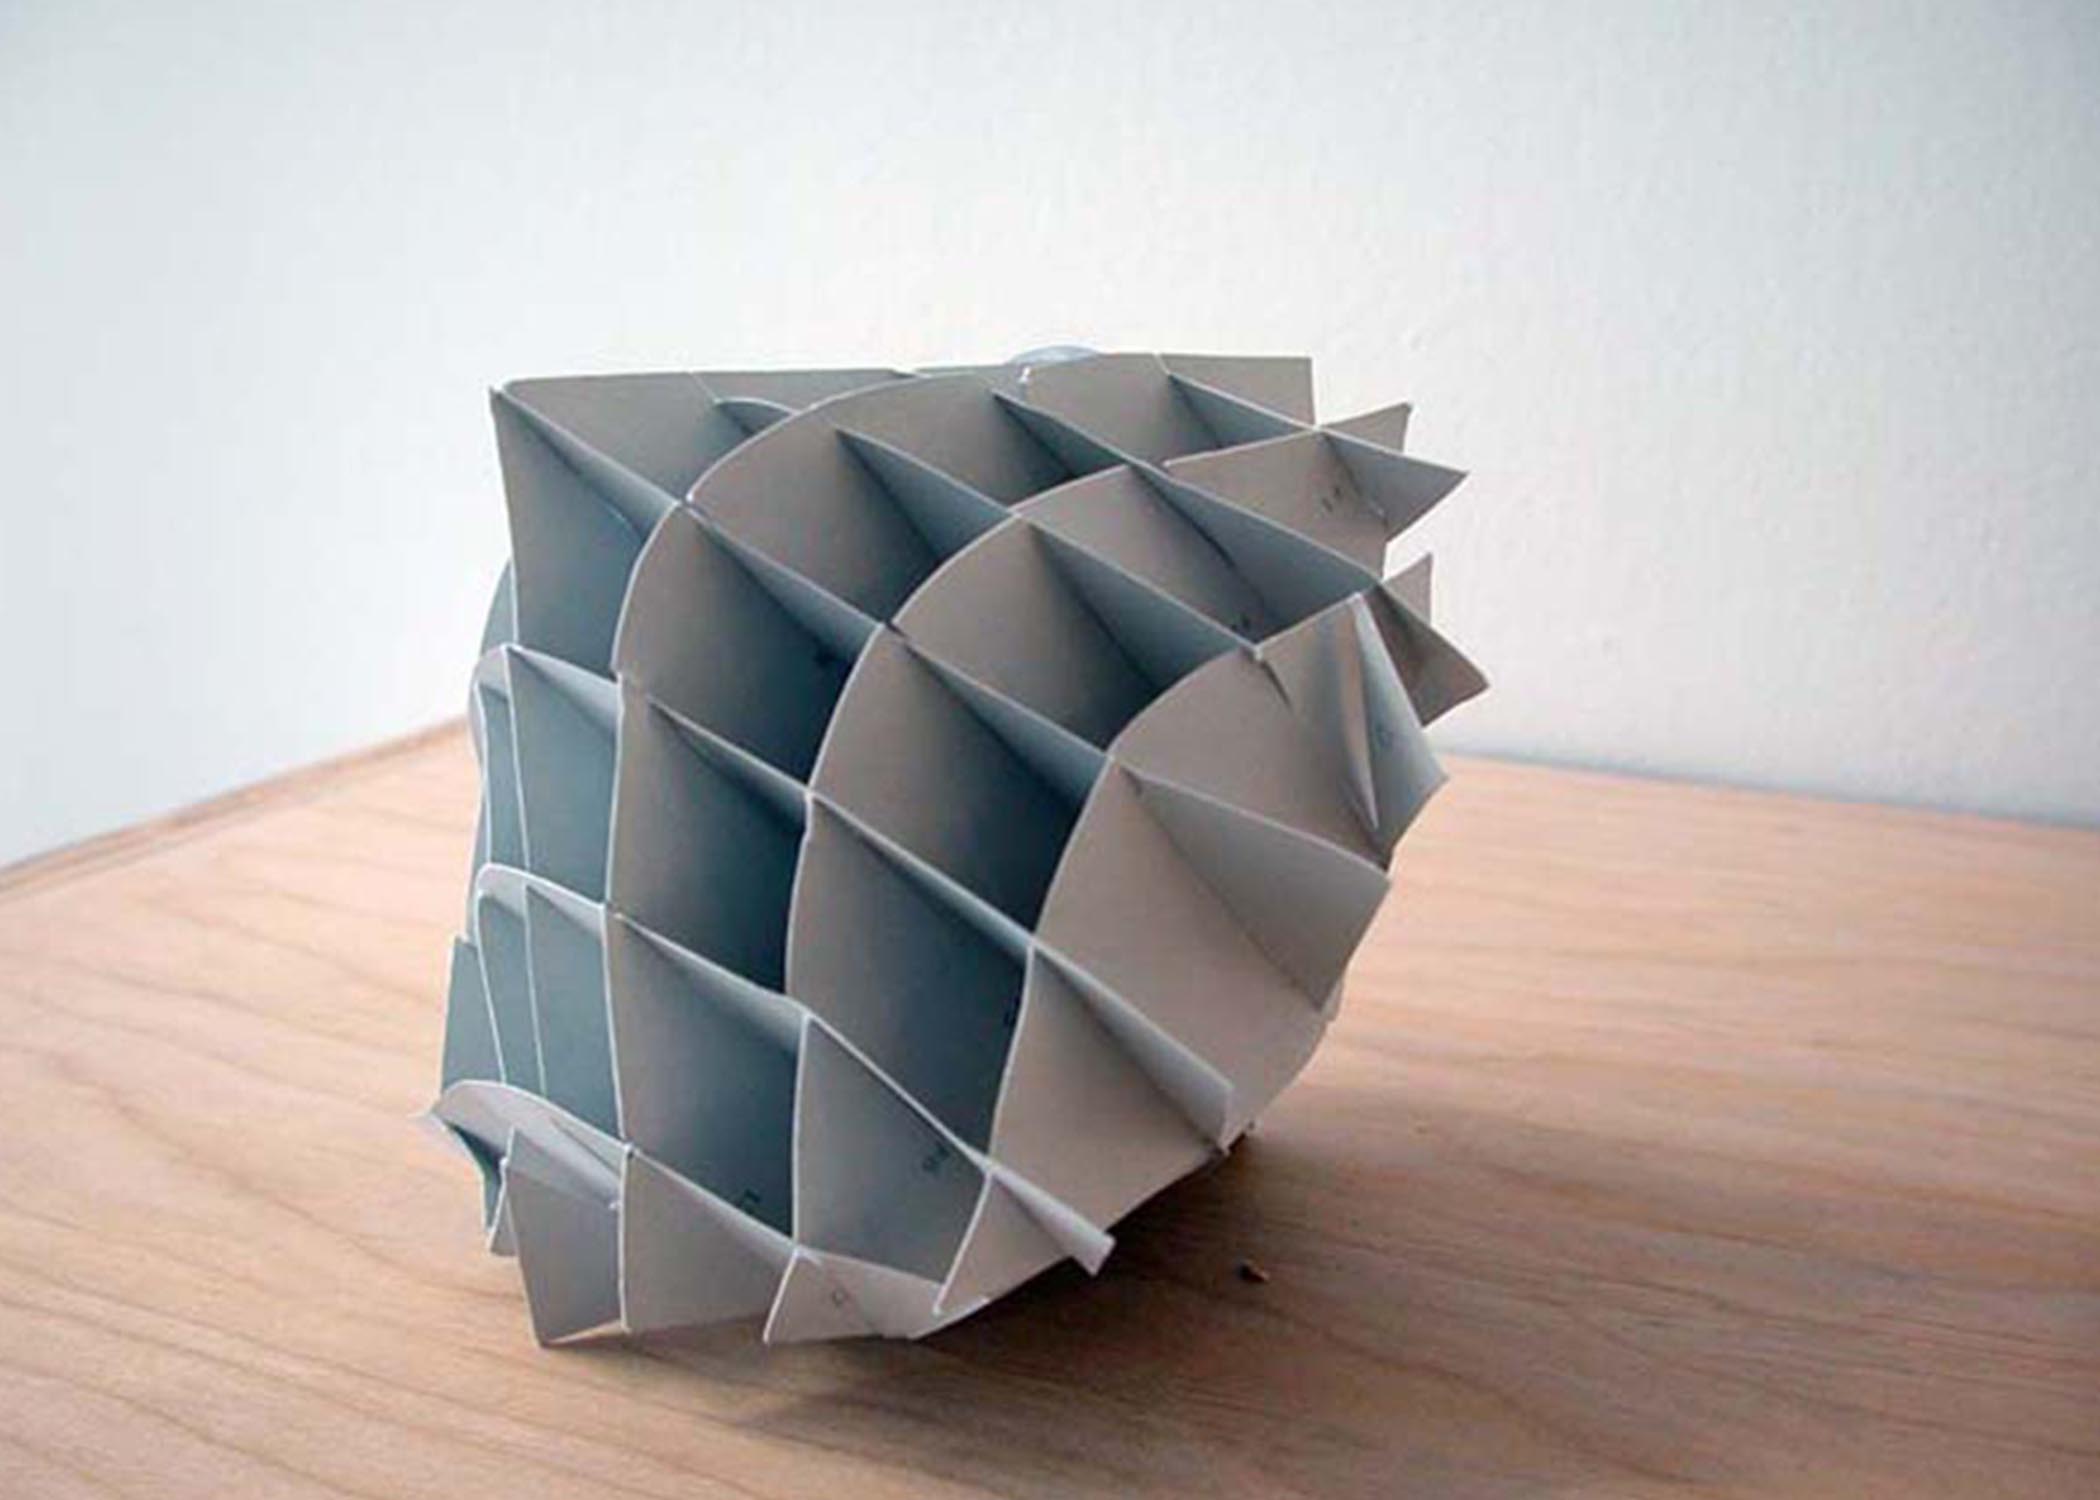 Seong Chun's  Craft-Proof, a large paper sculpture with a round bottom and pointed top, divided into a grid of squares